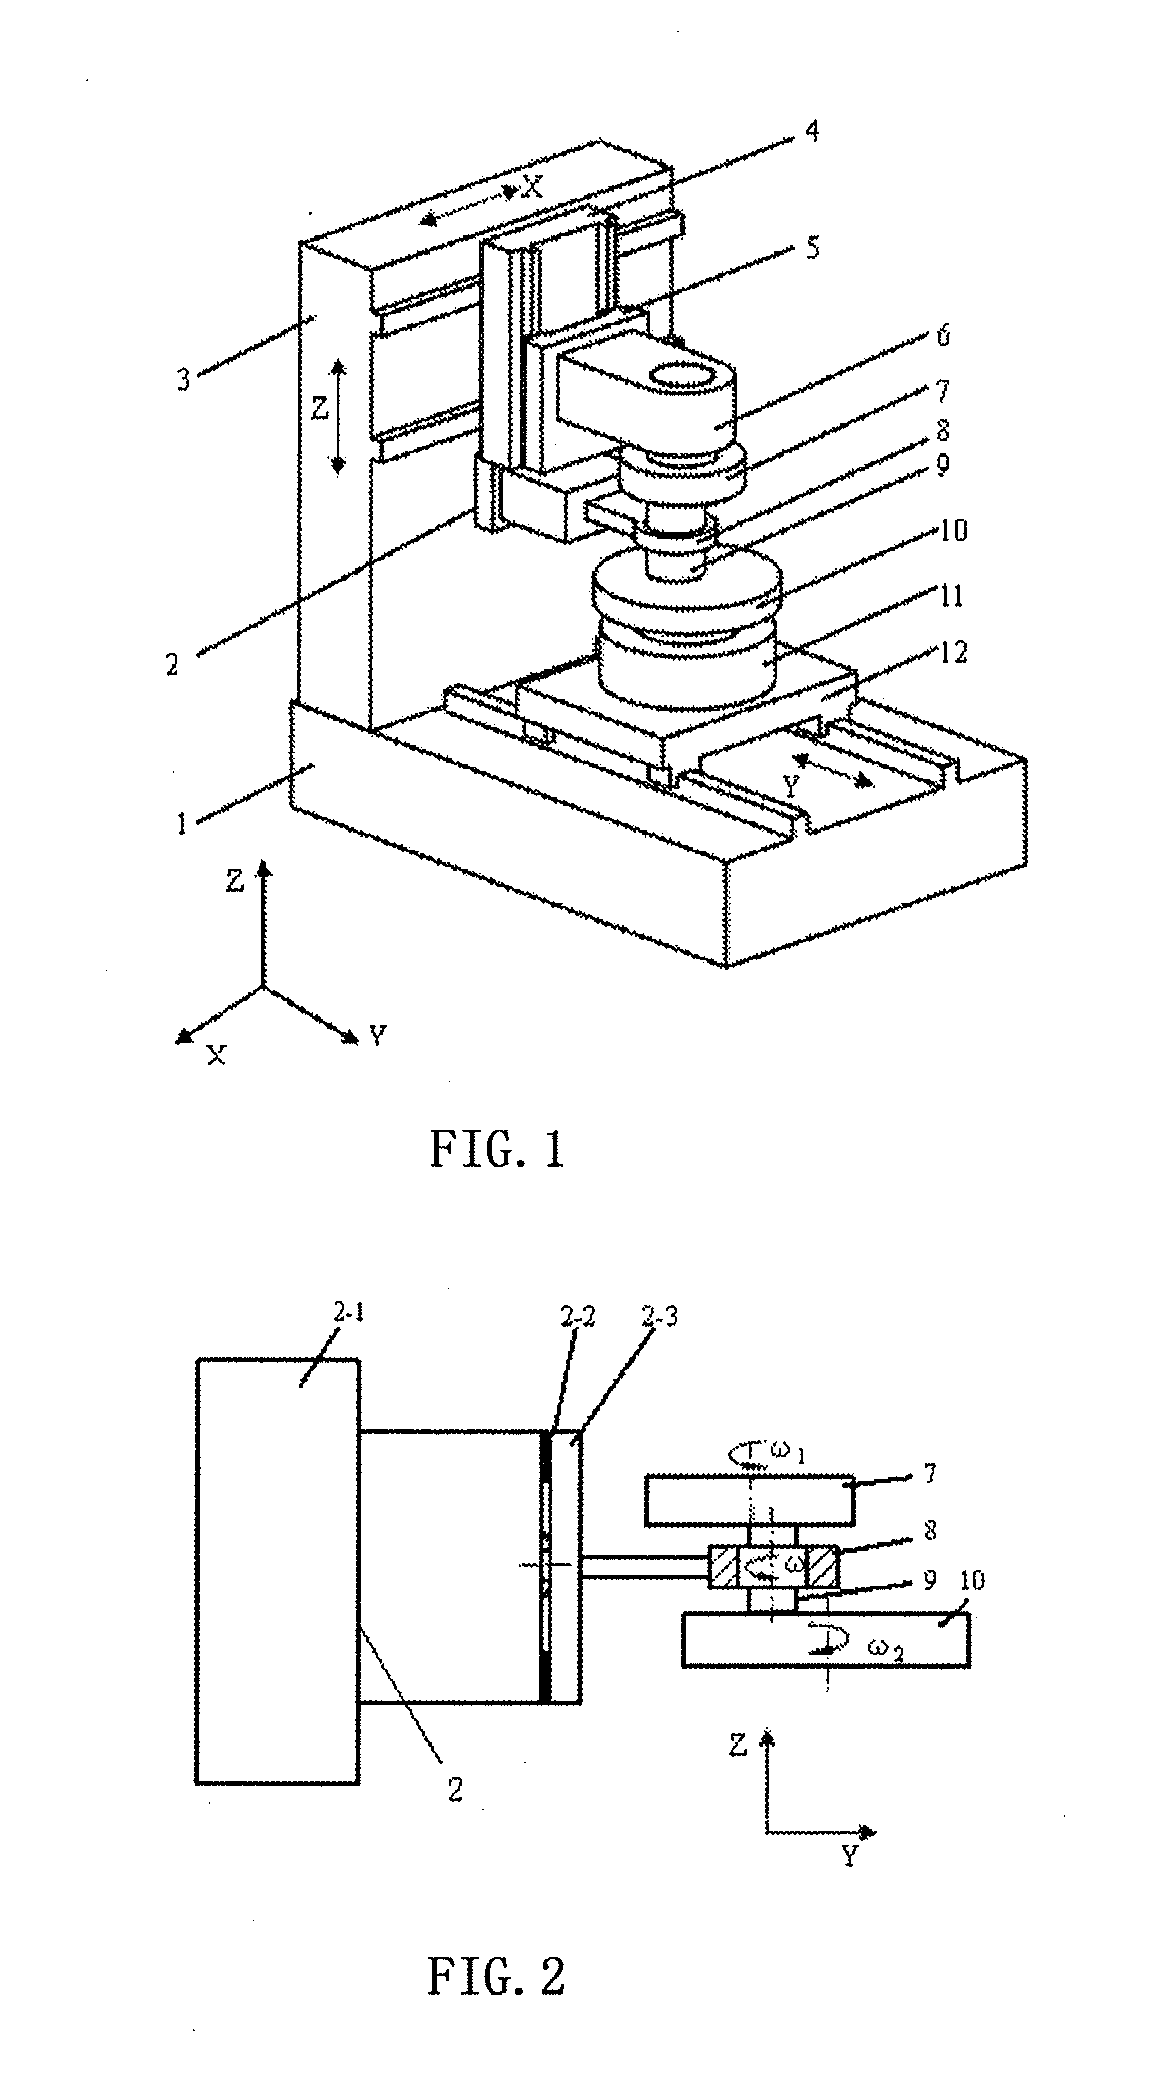 Computer numerical control machine tool for grinding two sides of a plane by shifting self-rotation and ultrasonic vibration